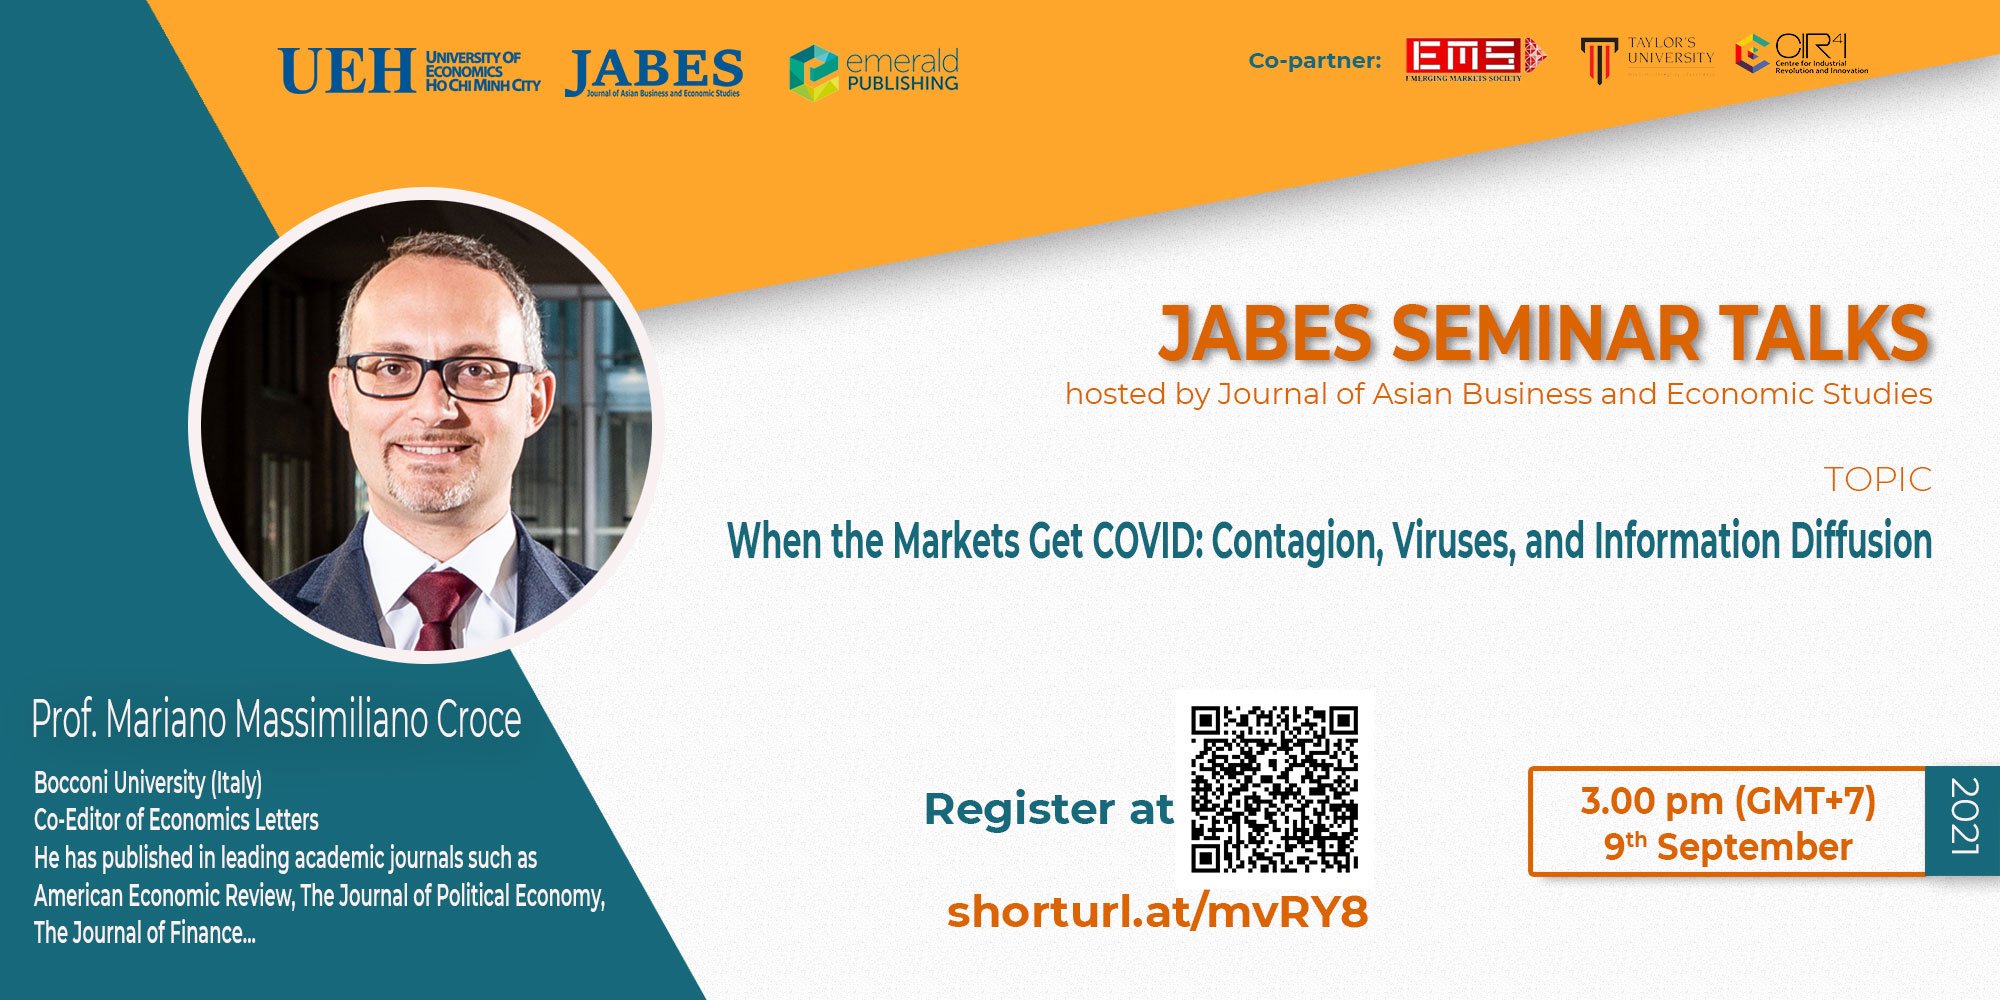 JST September 2021 with the topic: “When the Markets Get COVID: Contagion, Viruses, and Information Diffusion?”